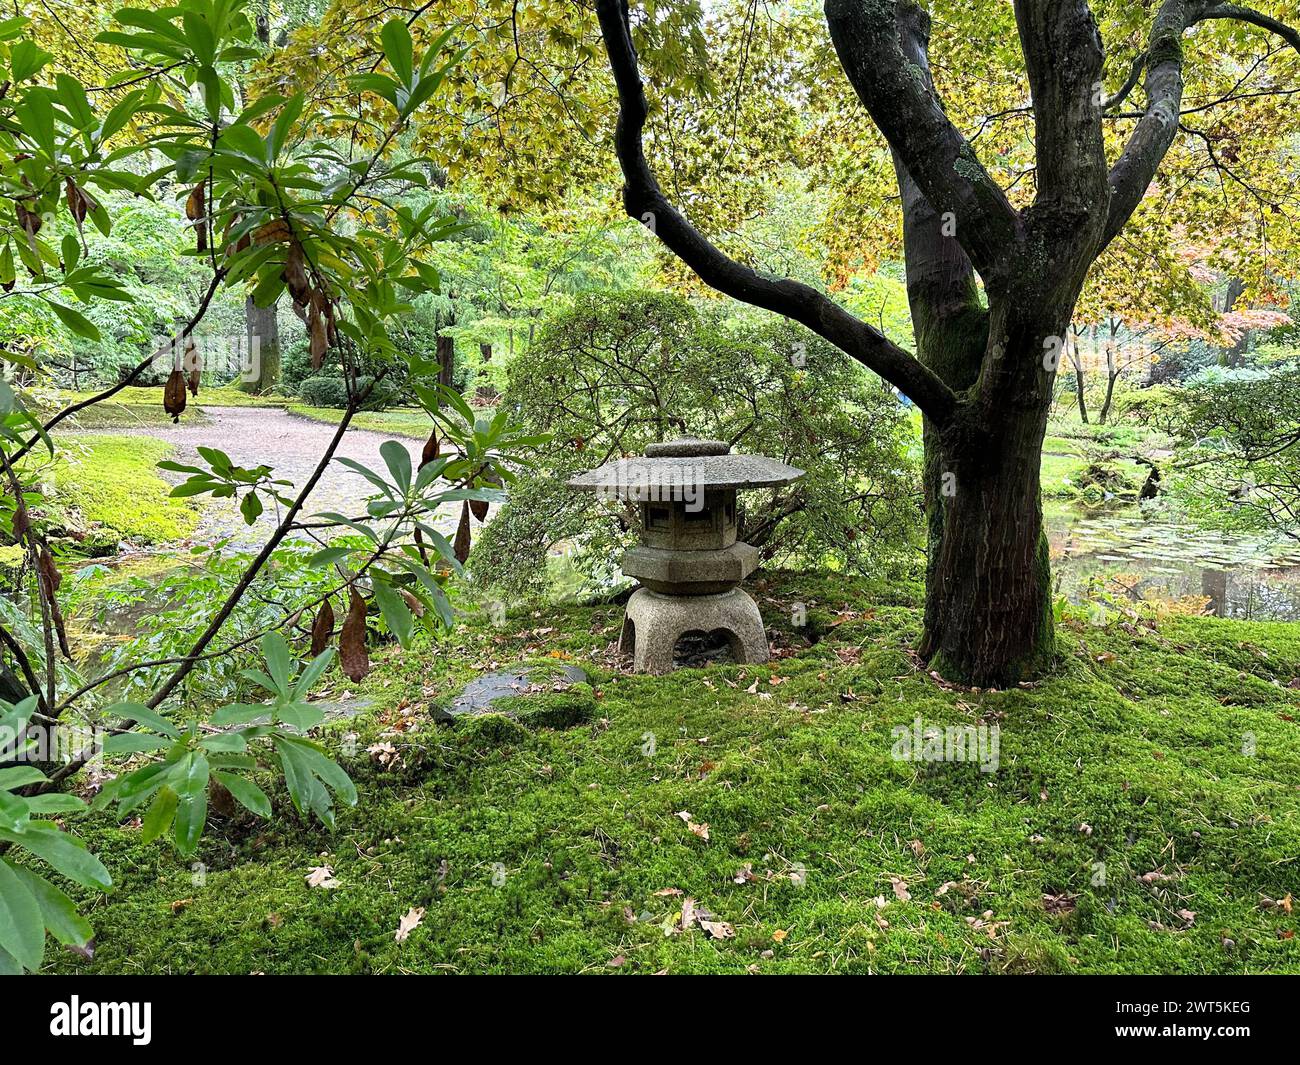 Different plants, stone lantern and little pond in Japanese garden Stock Photo